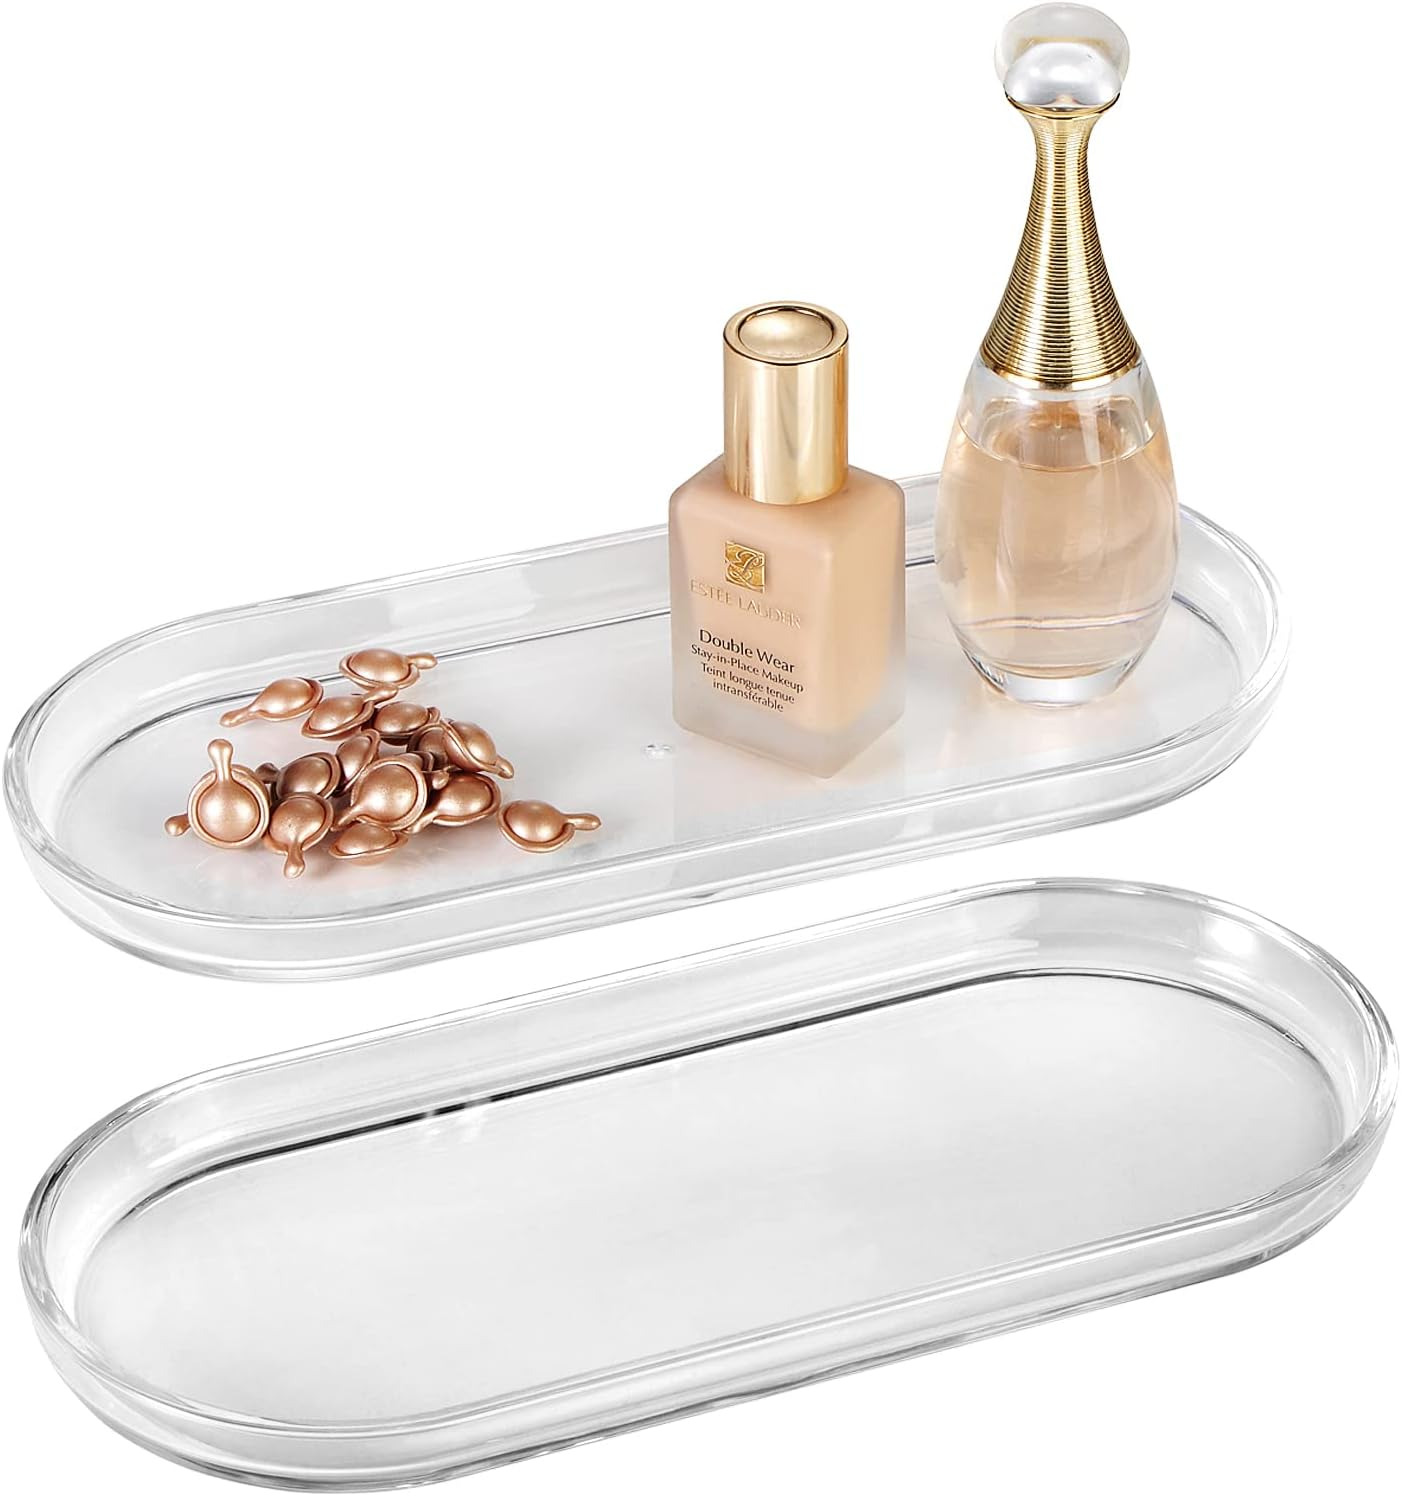 Acrylic Vanity Tray, 2 Pack, Clear, 9.65 in x 4.5 in x 0.79 in, Catchall Tray, C